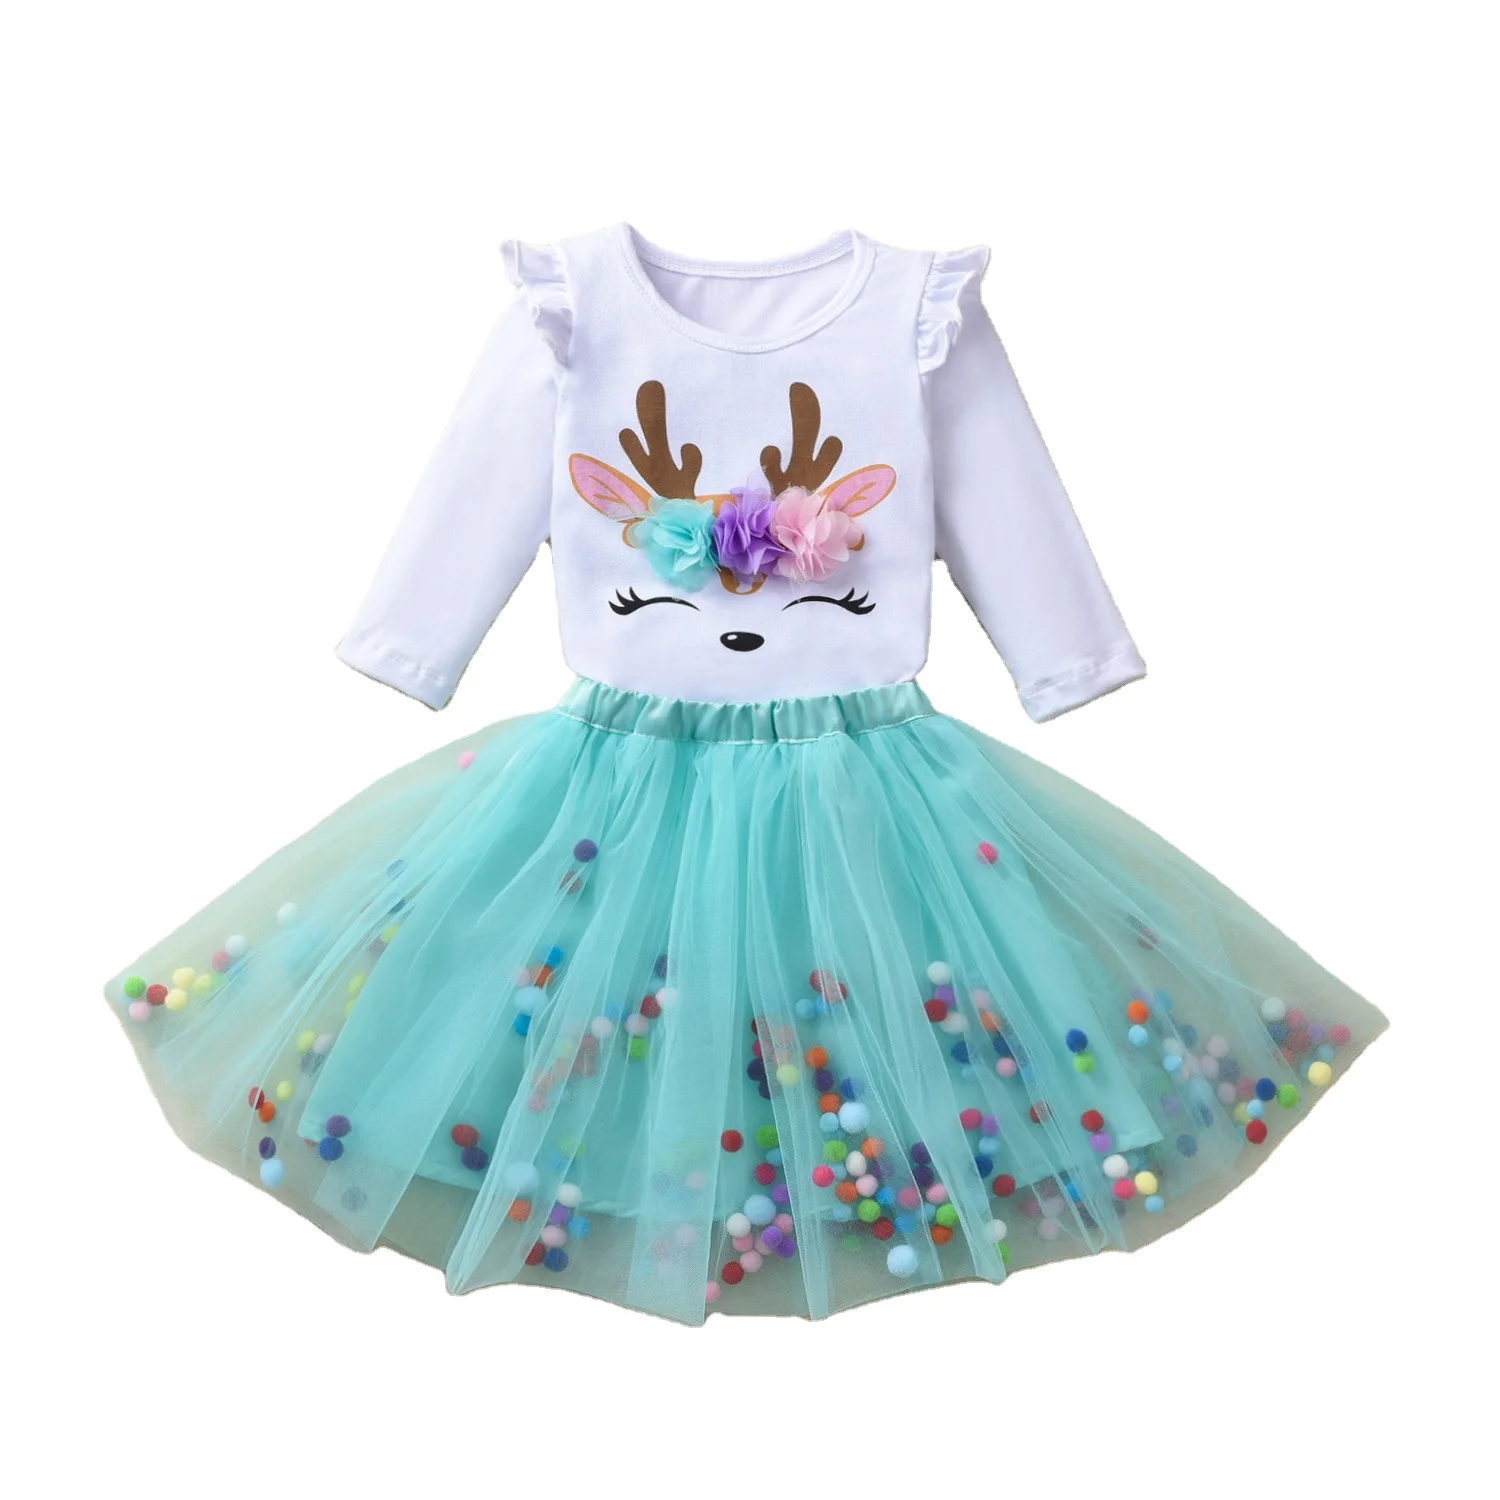 

Baby Girl Dress Unicorn long sleeve Tutu Dress Toddler Kids Clothes Baby 1st Birthday Outfits infant baby girl party dress